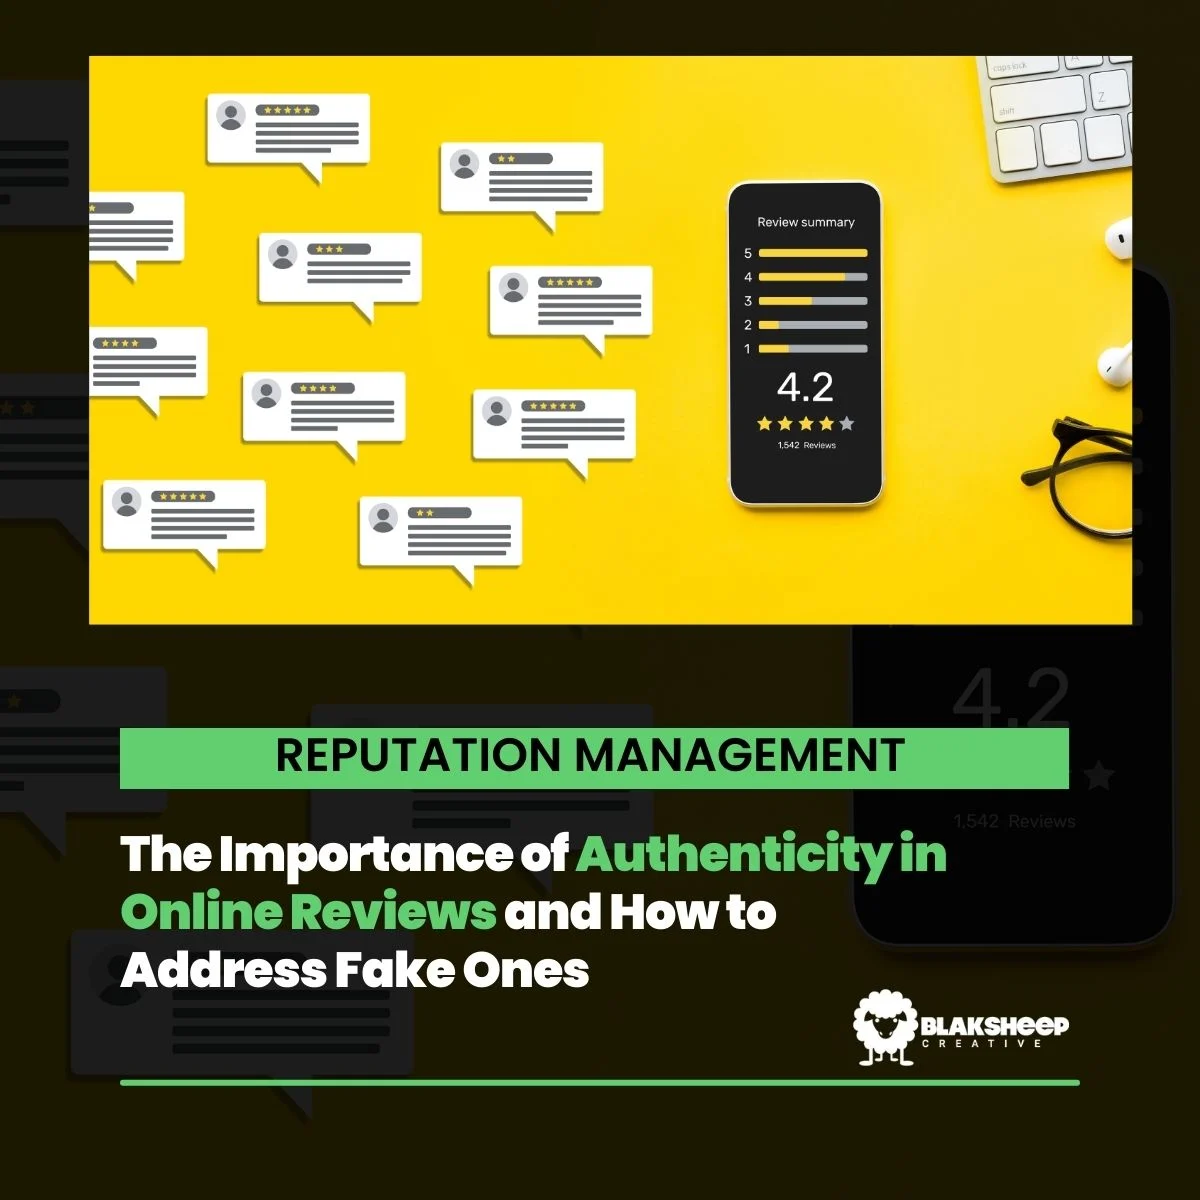 online reputation management with reviews on yellow background and phone rating display